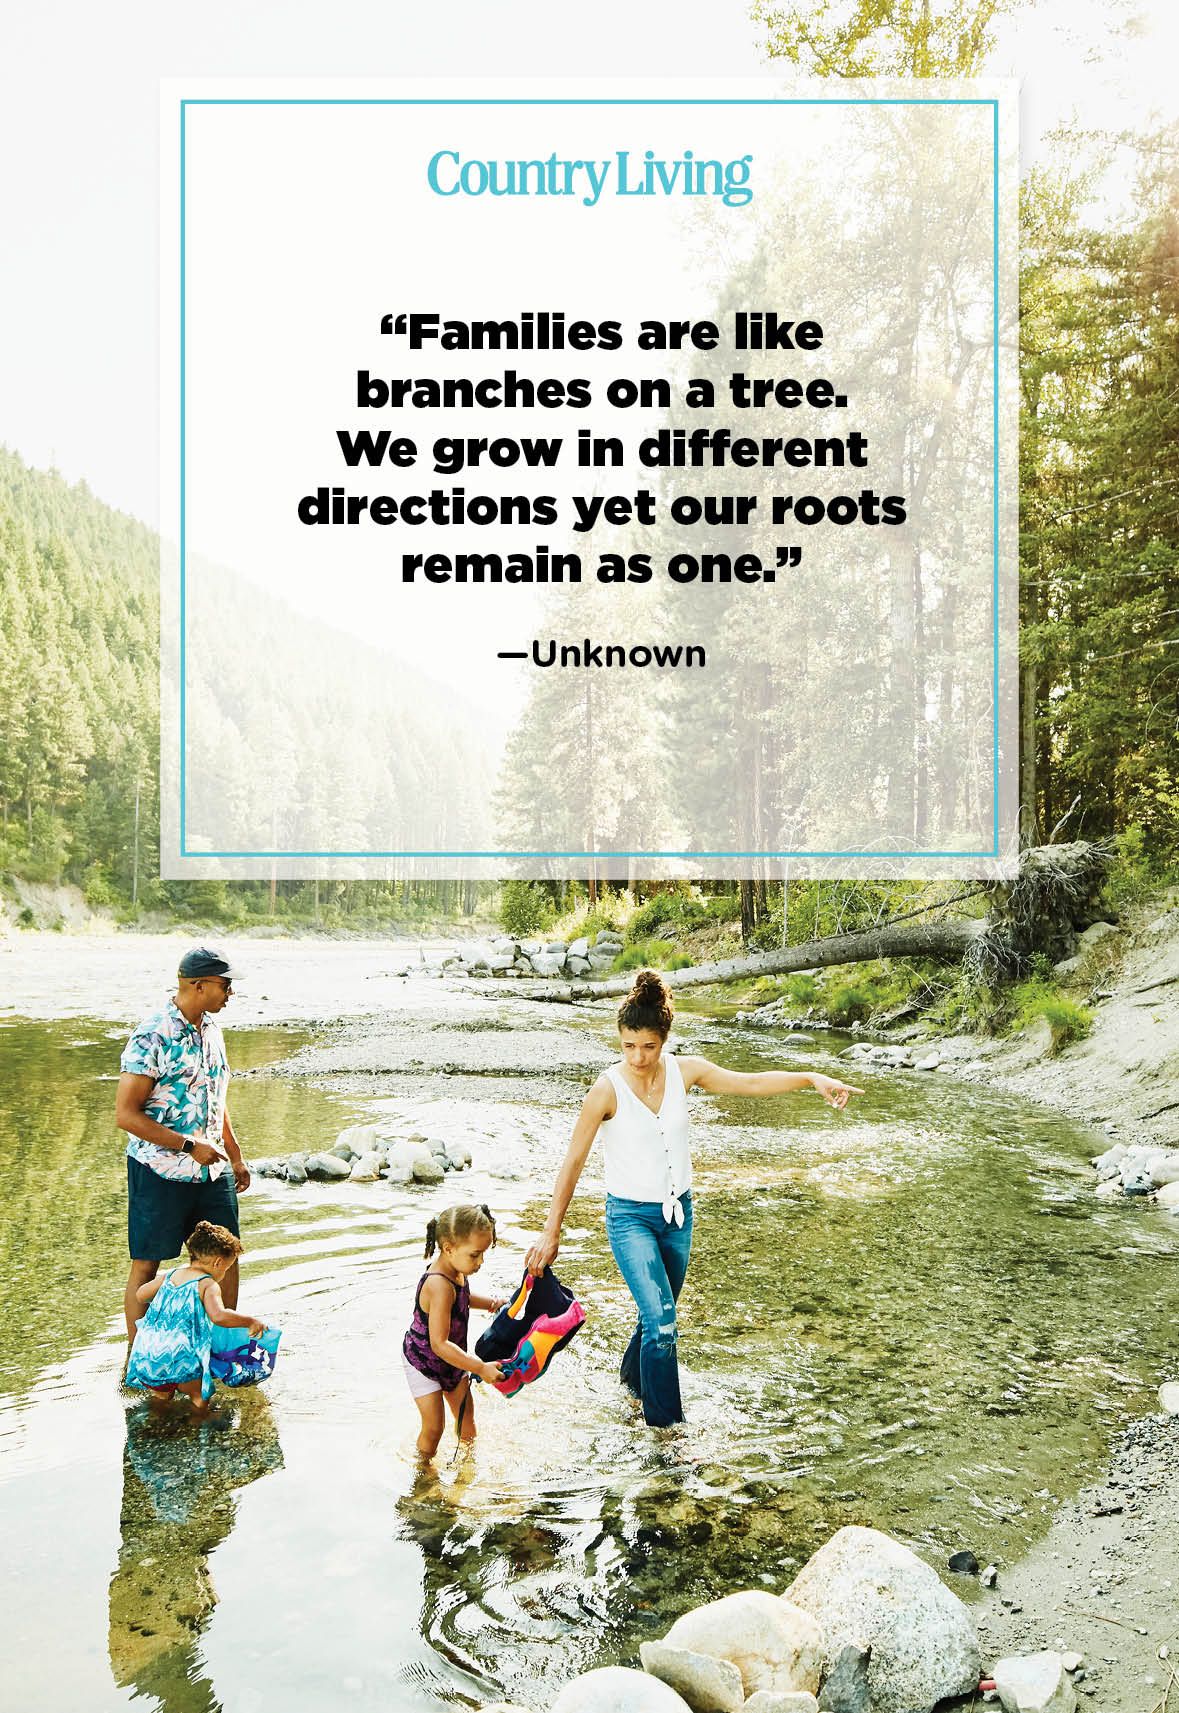 happy family quotes and sayings